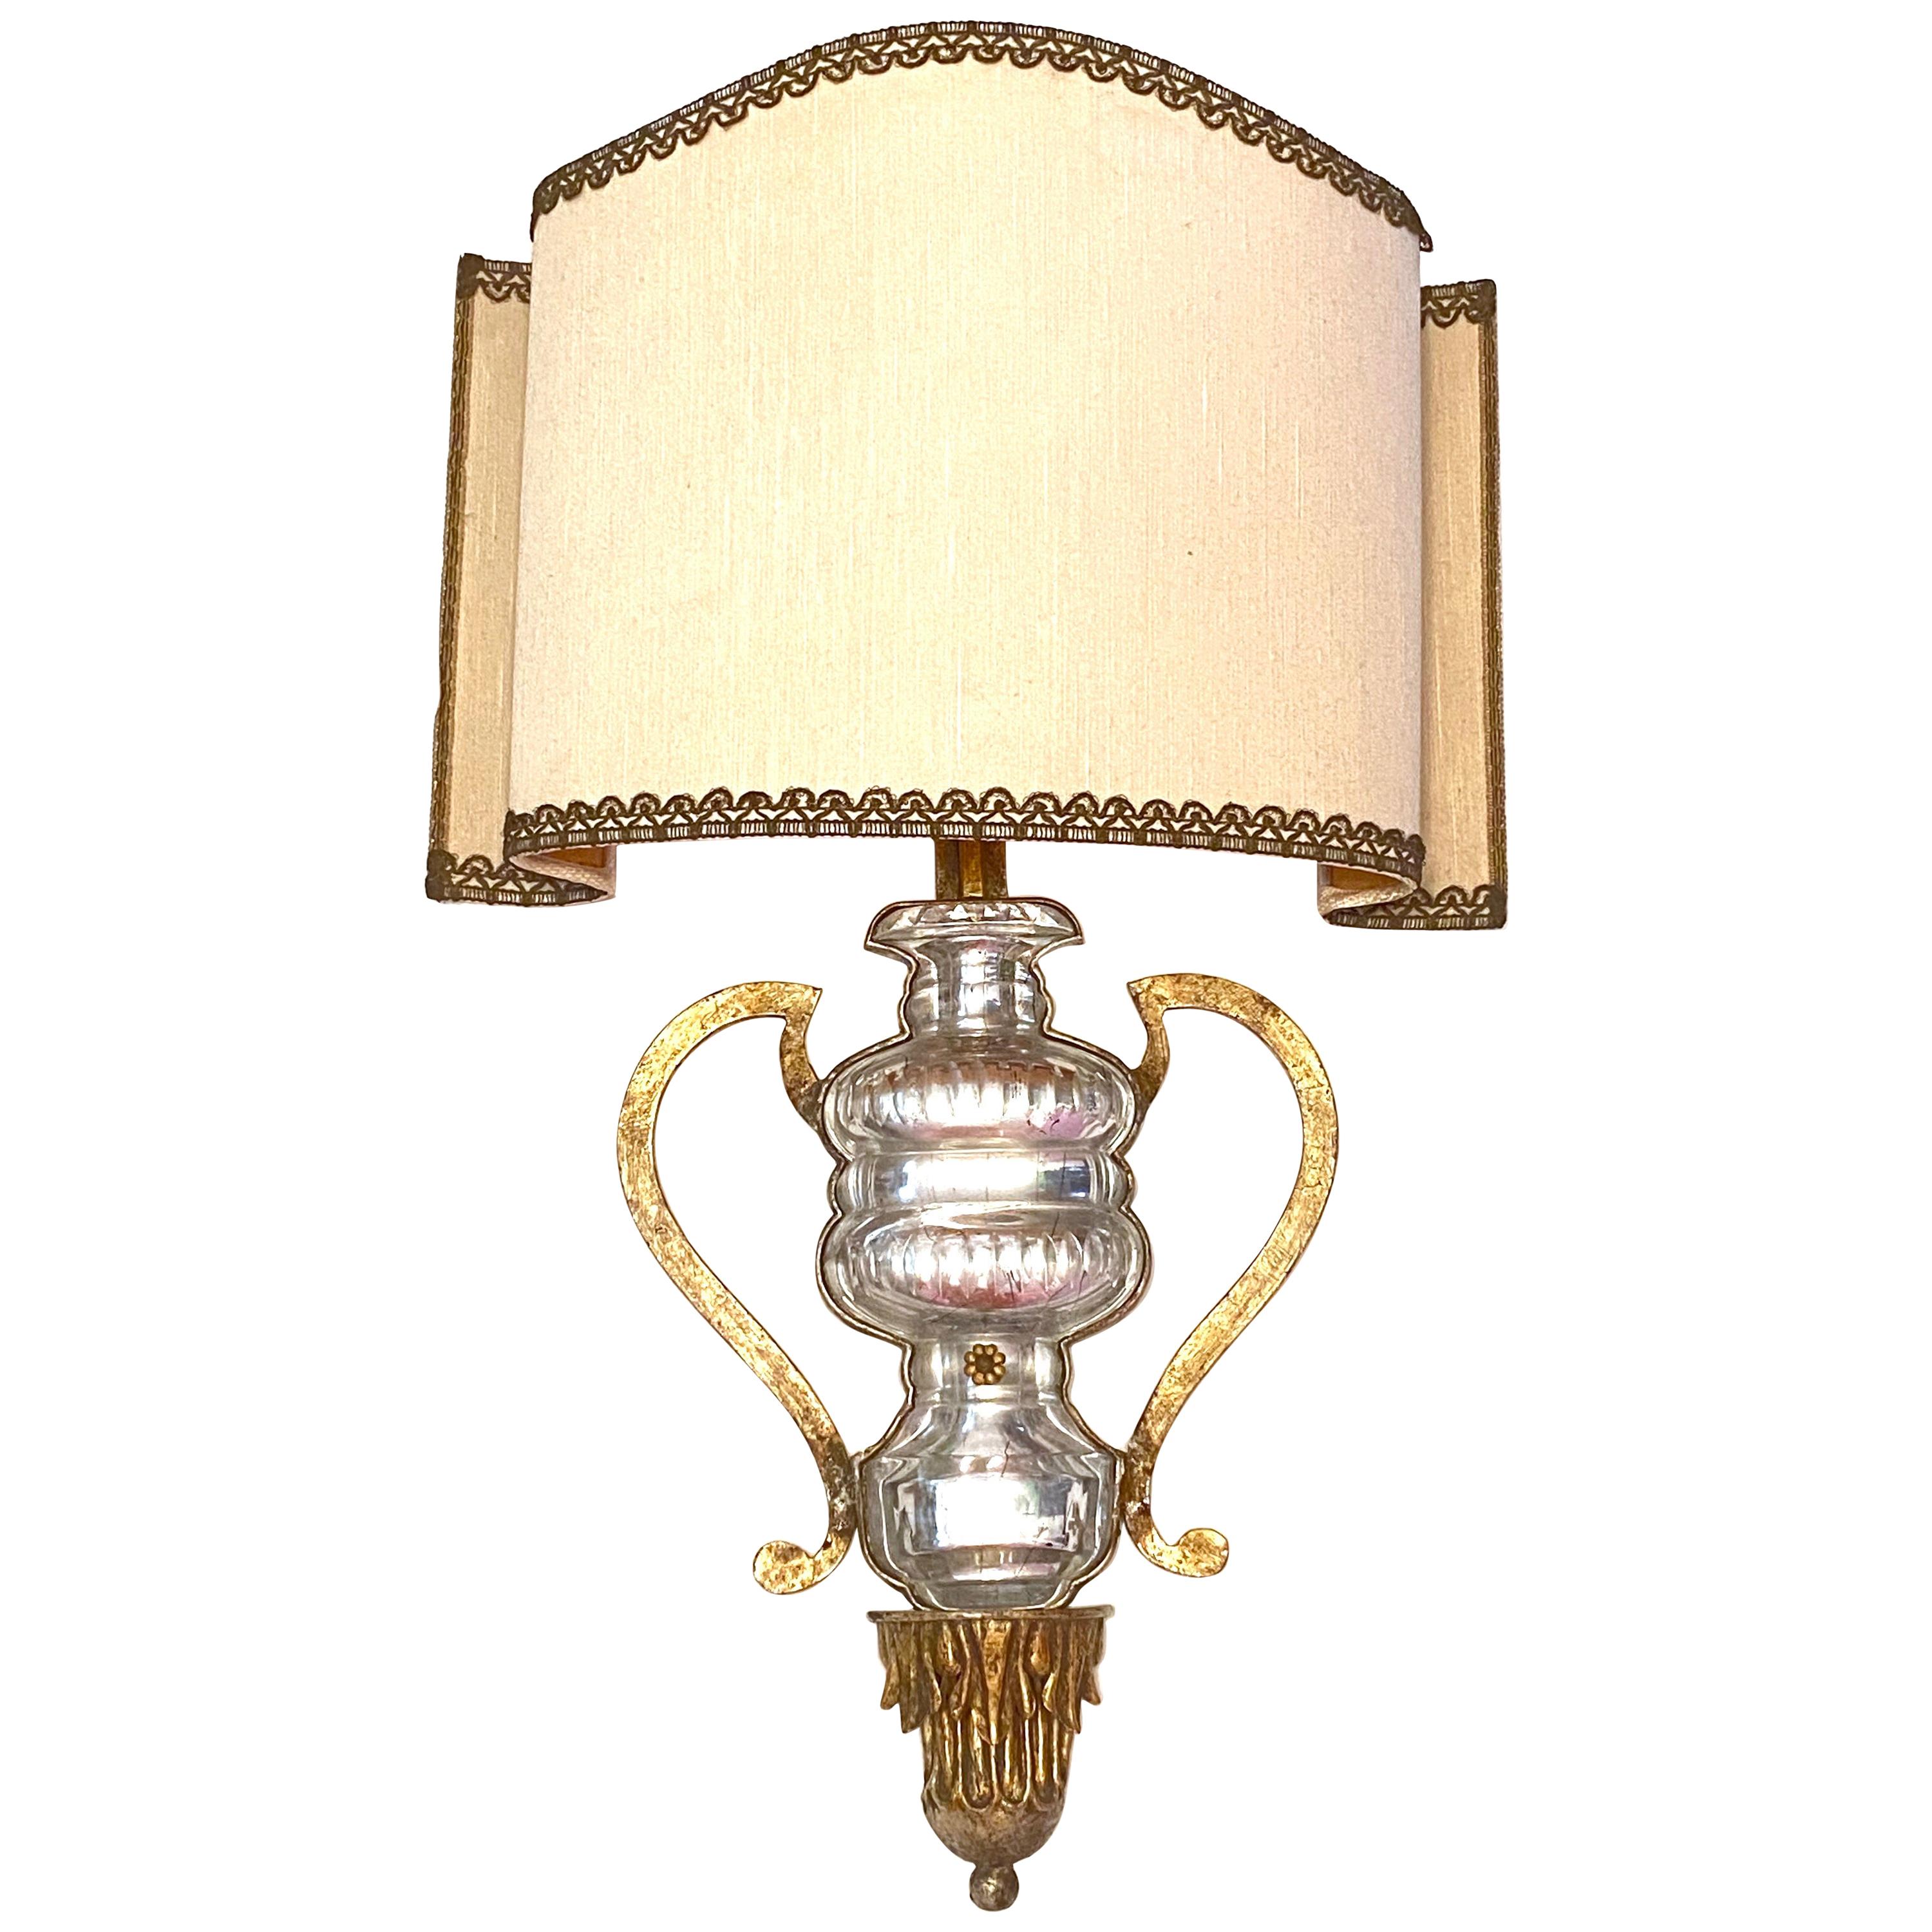 Gorgeous Monumental Italian Crystal Urn Motif Wall Sconce by Banci Florence